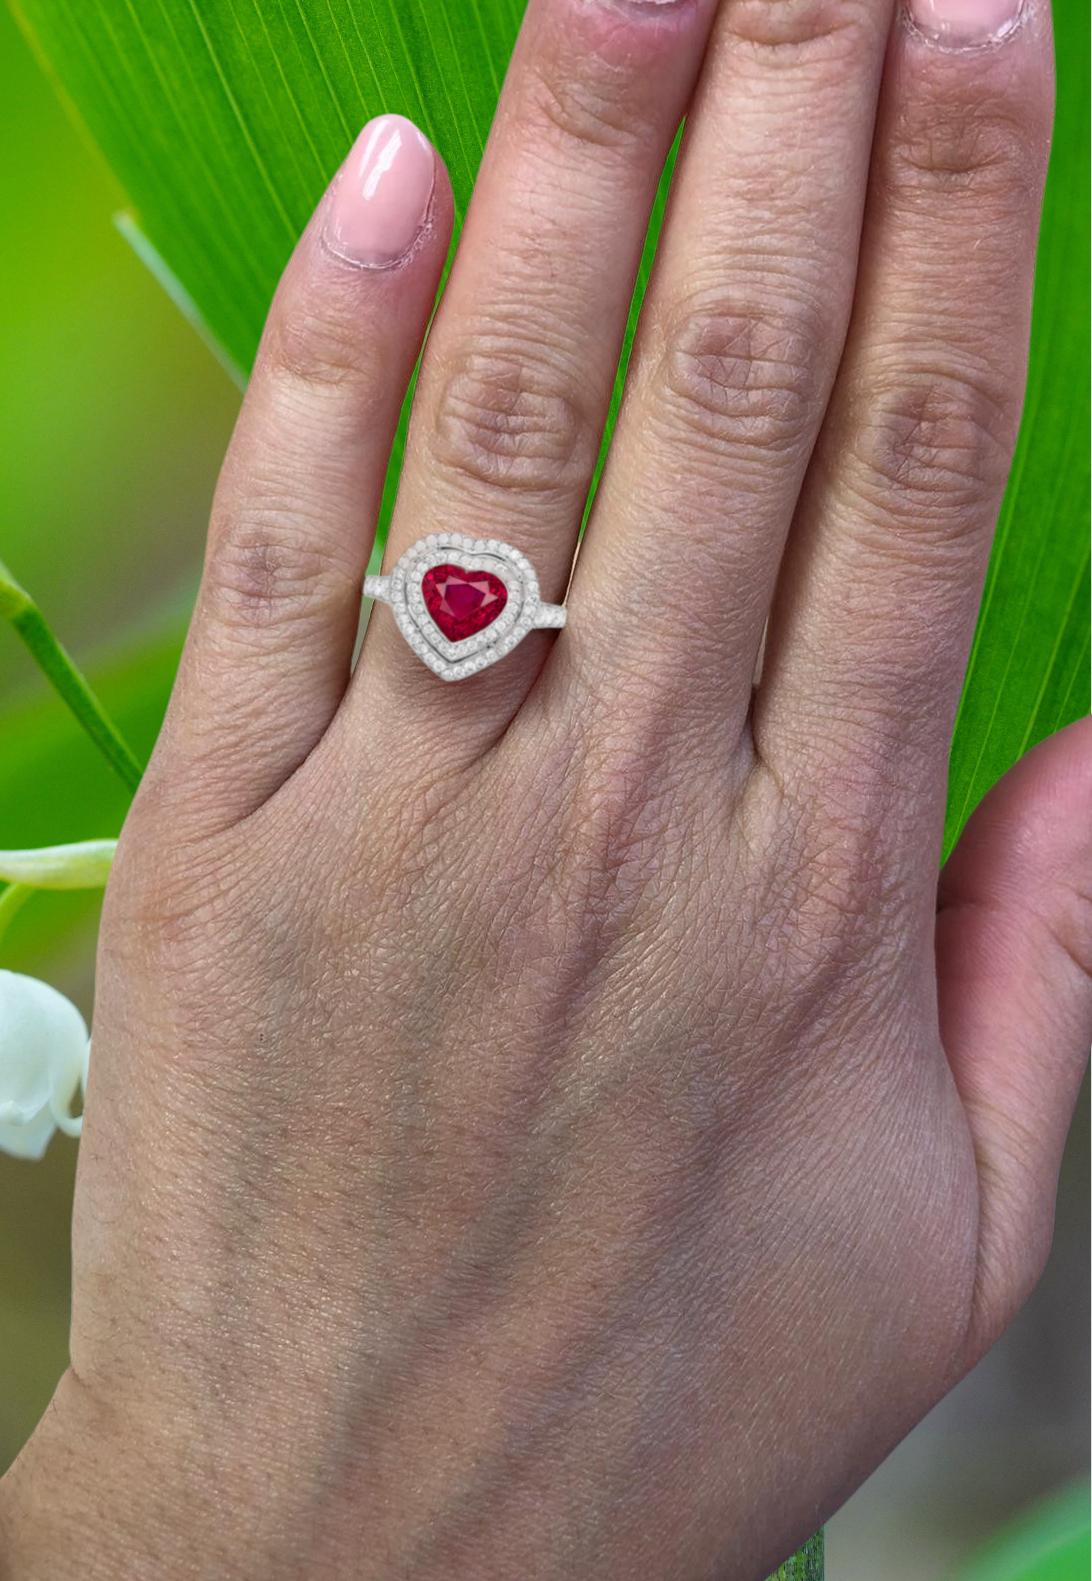 Centering on a vivid red ruby heart shaped ruby framed by two rows of diamonds

Metal: Platinum
Diamonds: round diamonds
Ruby: 1 heart shaped 
Size/Dimensions: US ring size 6.5

Rest Assured in the Authenticity of Your Treasured Ruby Ring!